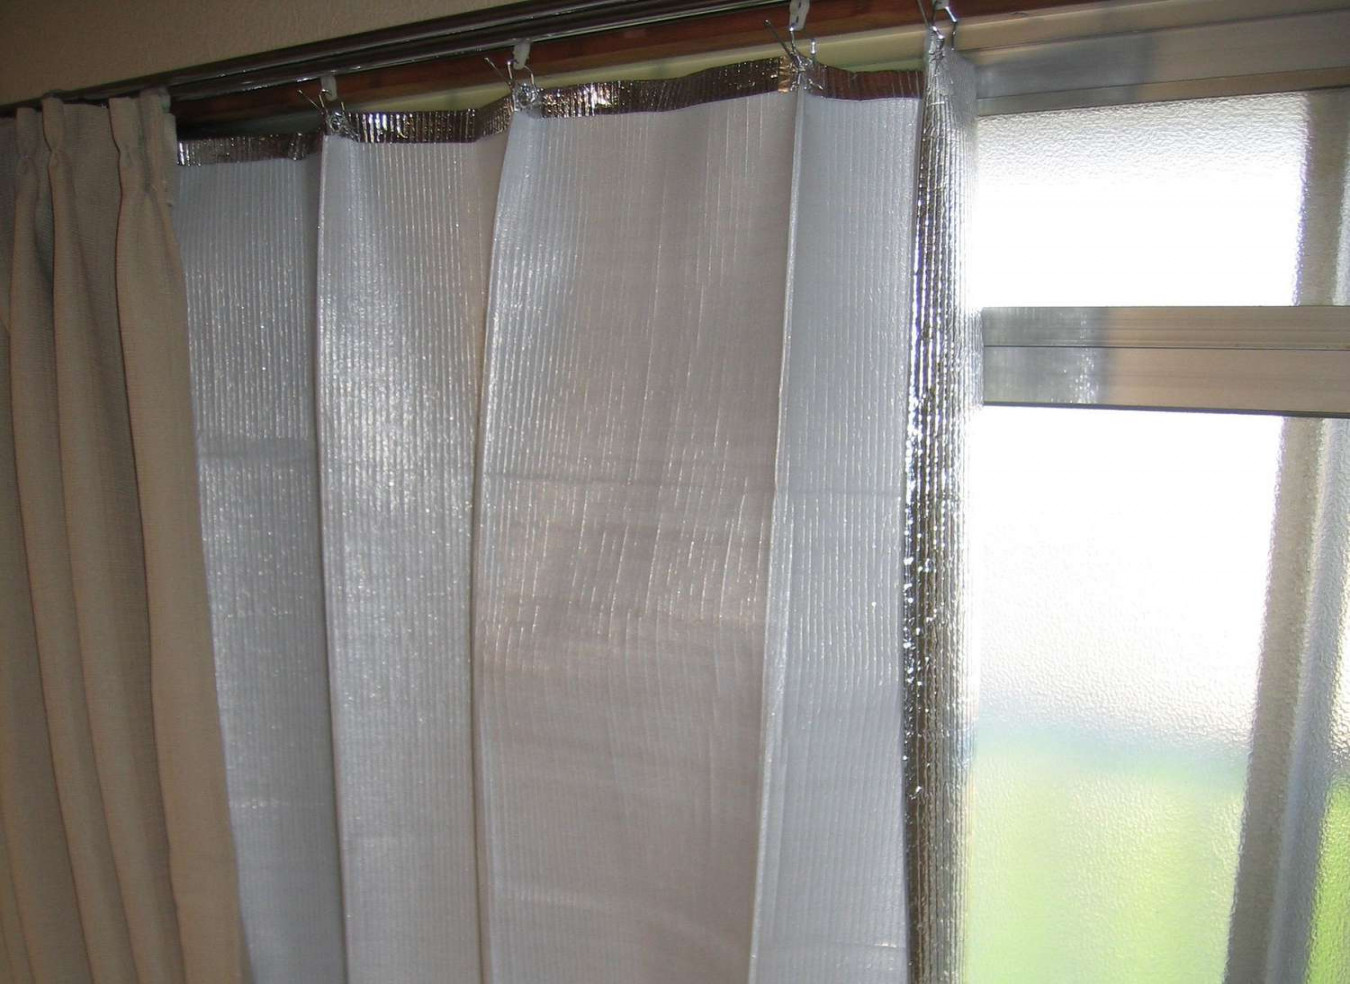 How to Make Heat Blocking Curtains for $